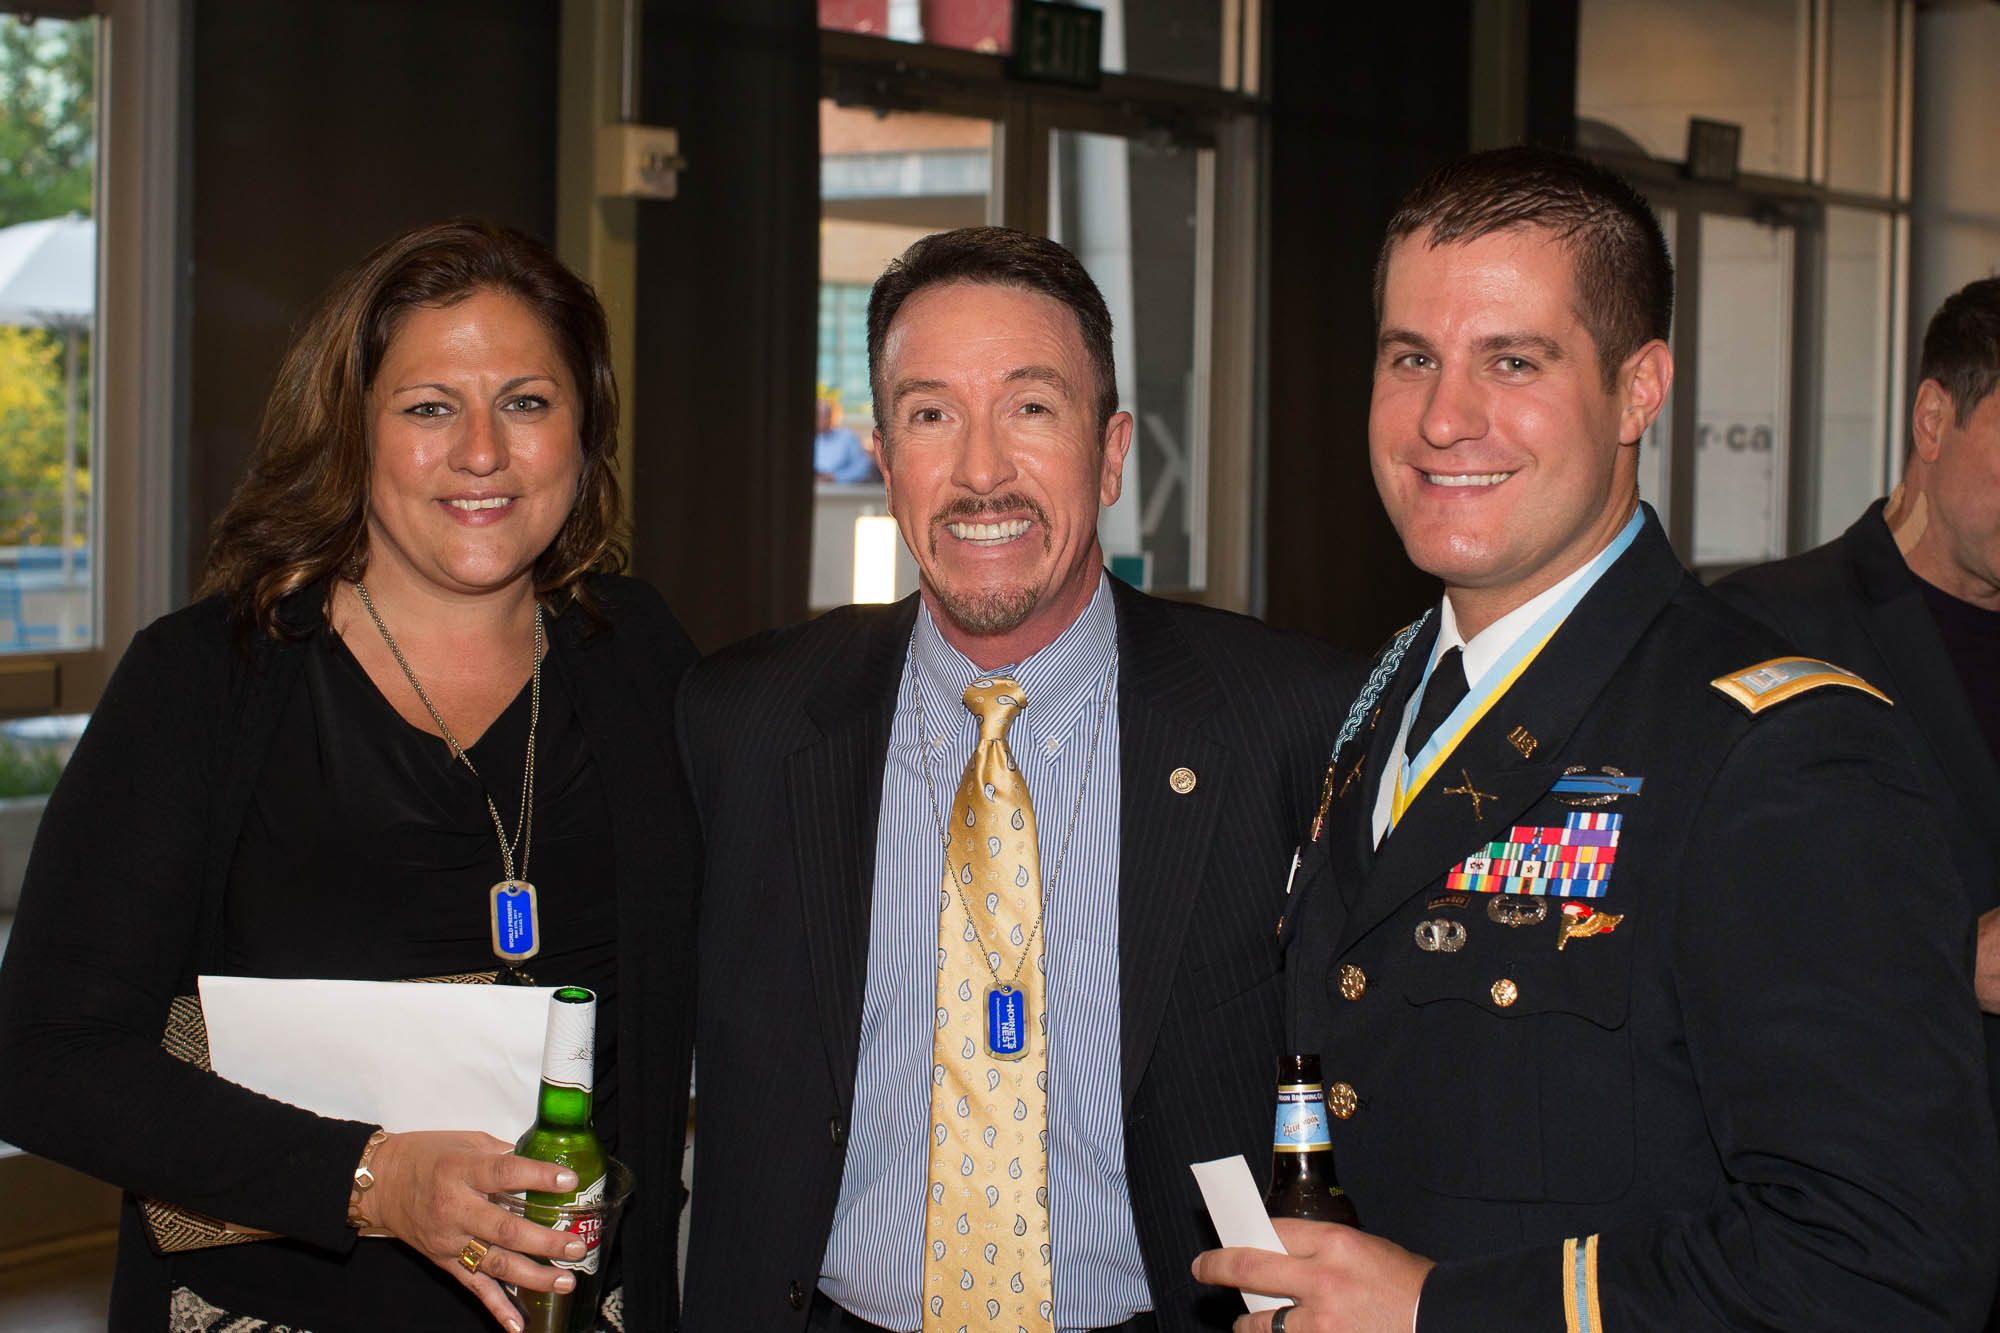 Premier of The Hornet's Nest Film with Laurie Baker and CPT Kevin Mott.